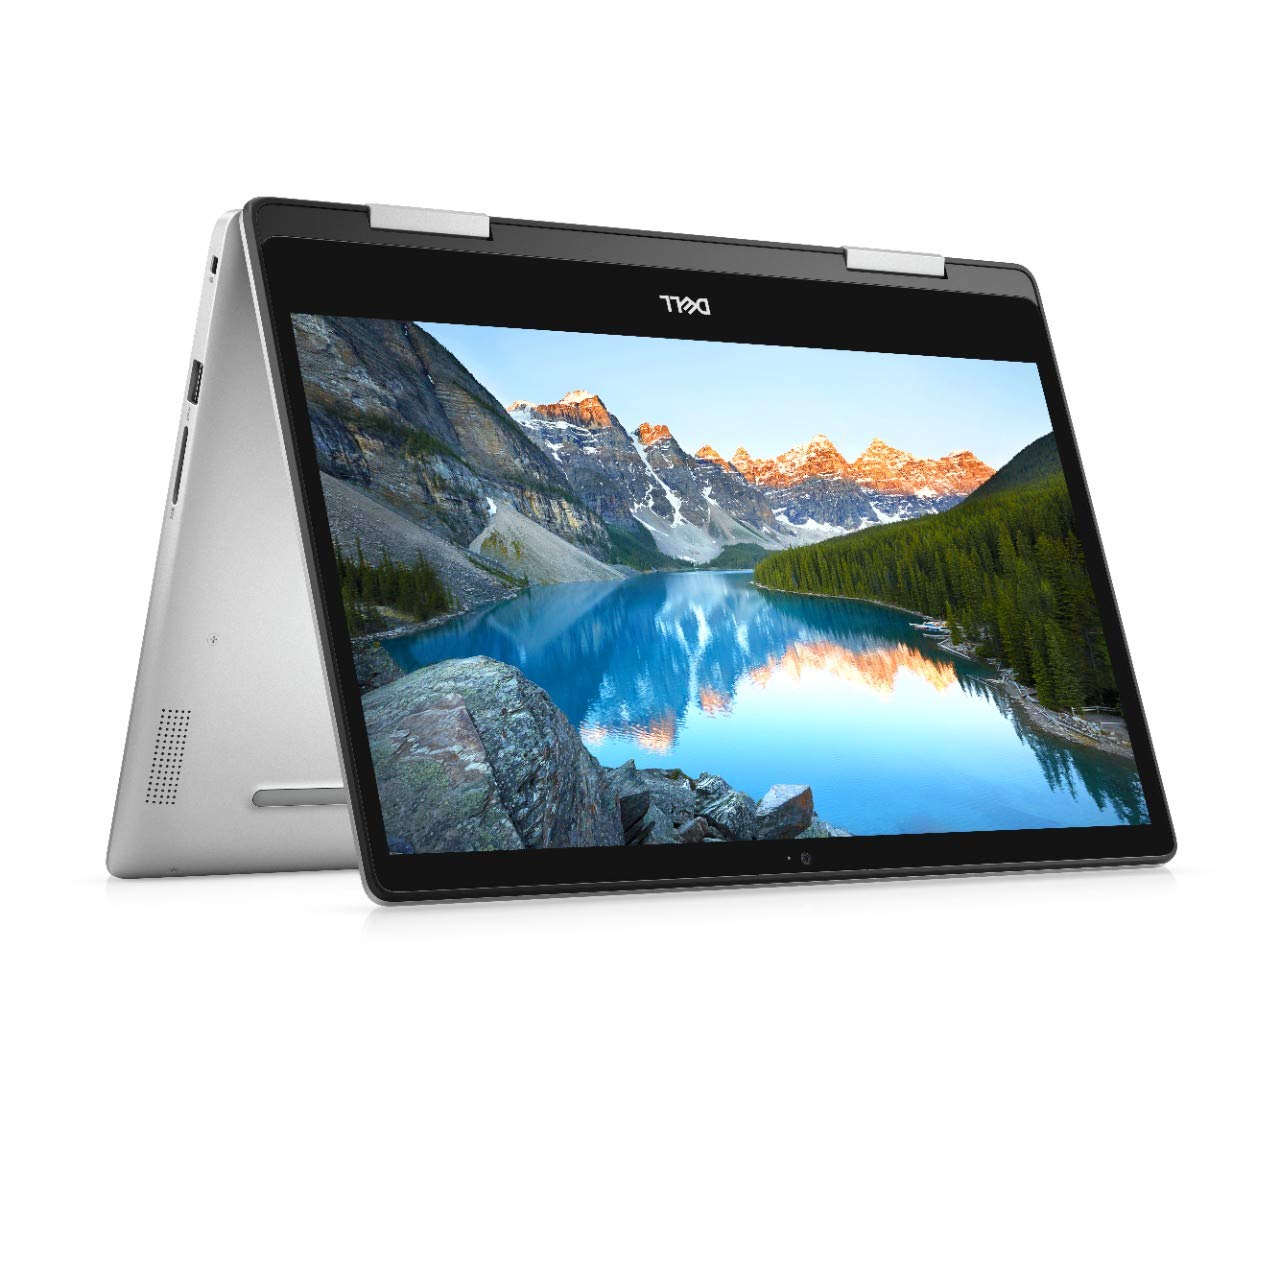 Dell Inspiron 5491 X360 SLV-C562522WIN9 i3-10110U ,Win 10 + Office H&S 2019 4GB DDR4 ,1TB HDD +256GB SSD INTEGRATED 14.0" FHD IPS Touch 60 Hz Backlit Keyboard bag